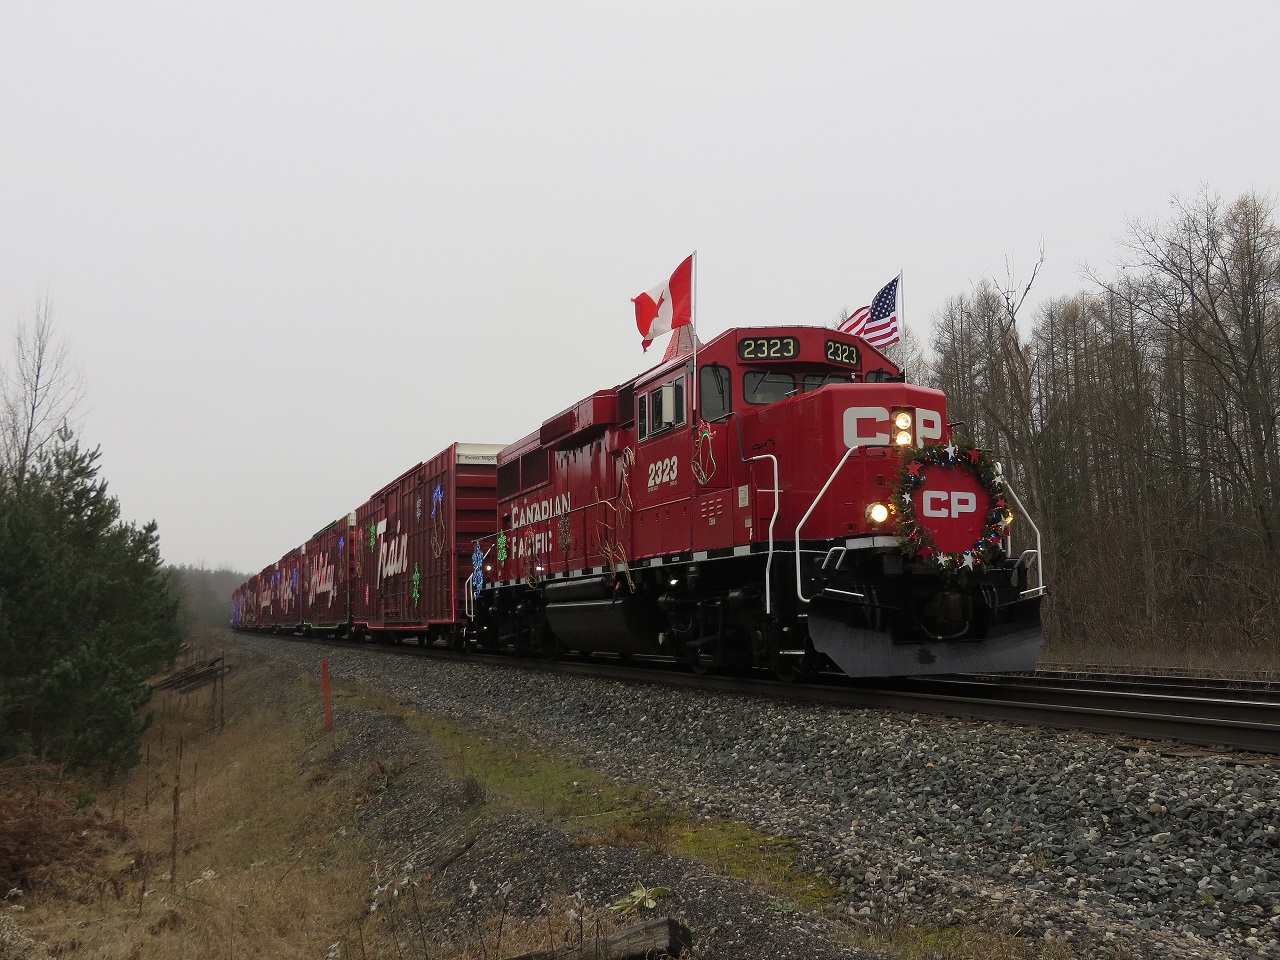 The Holiday Train arrives in Midhurst on a misty day.